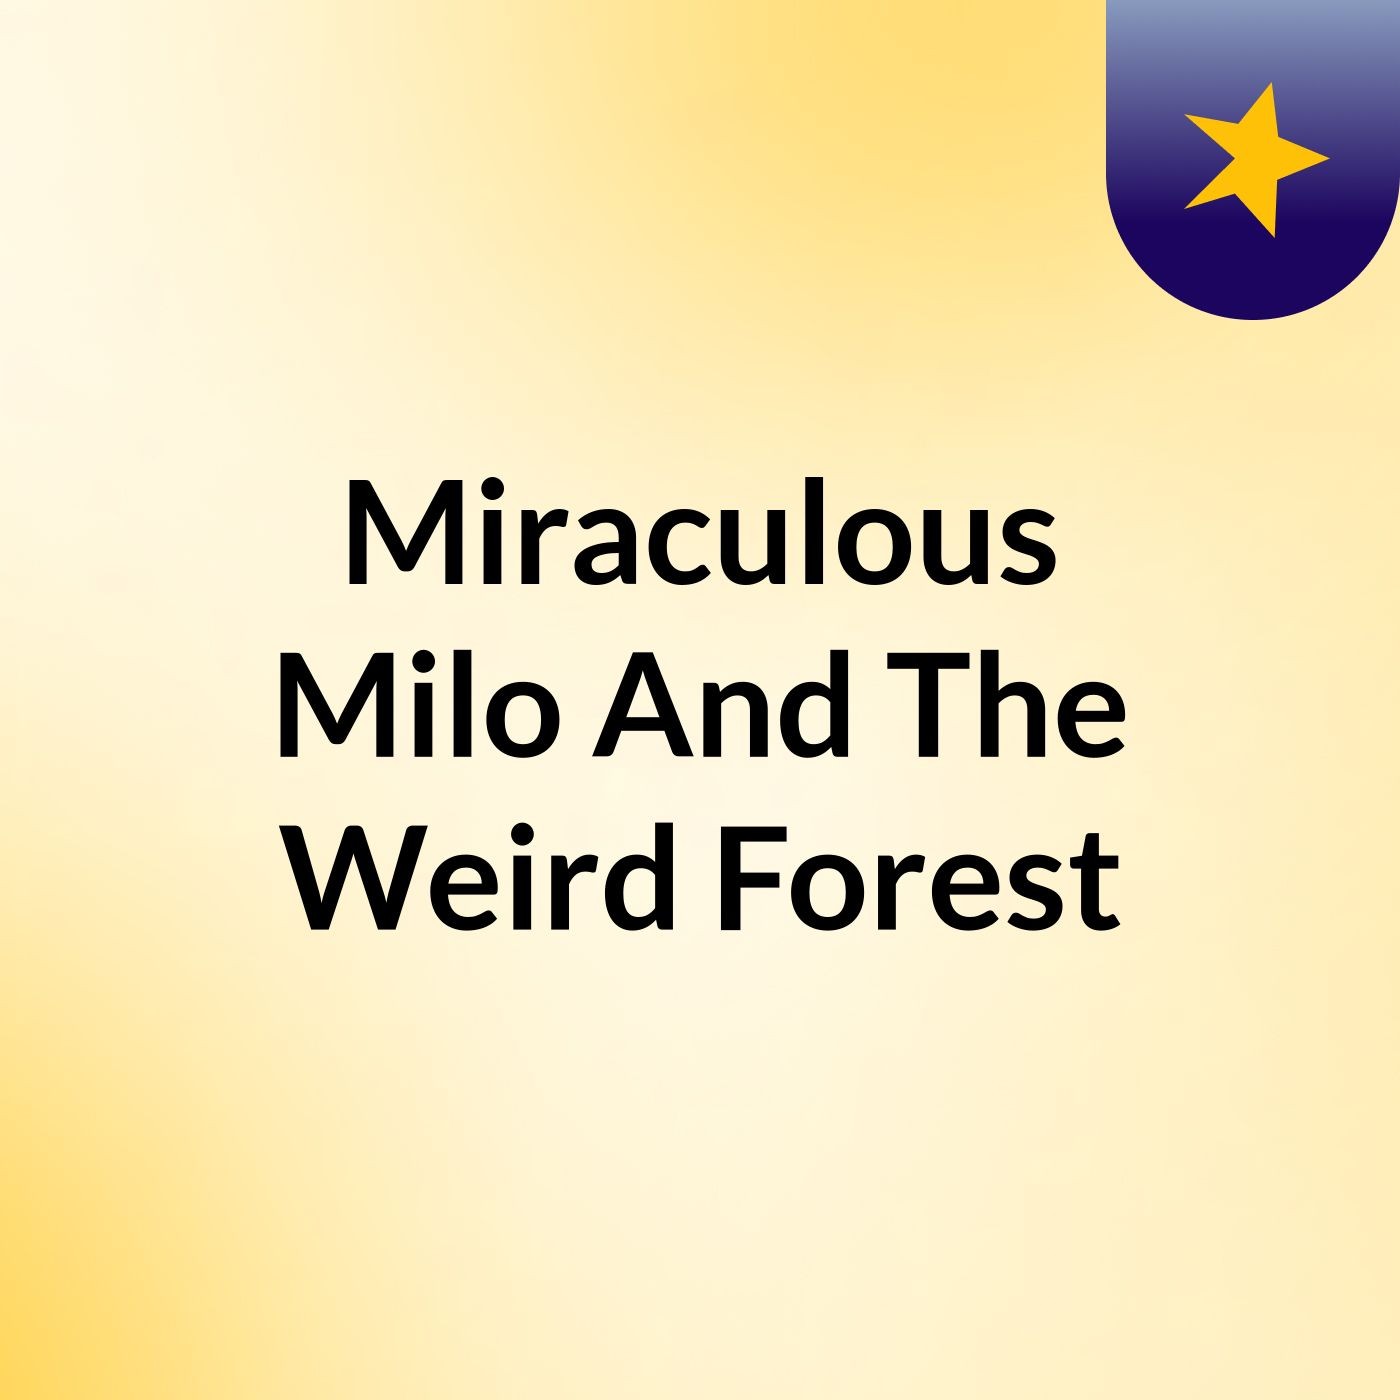 Miraculous Milo And The Weird Forest